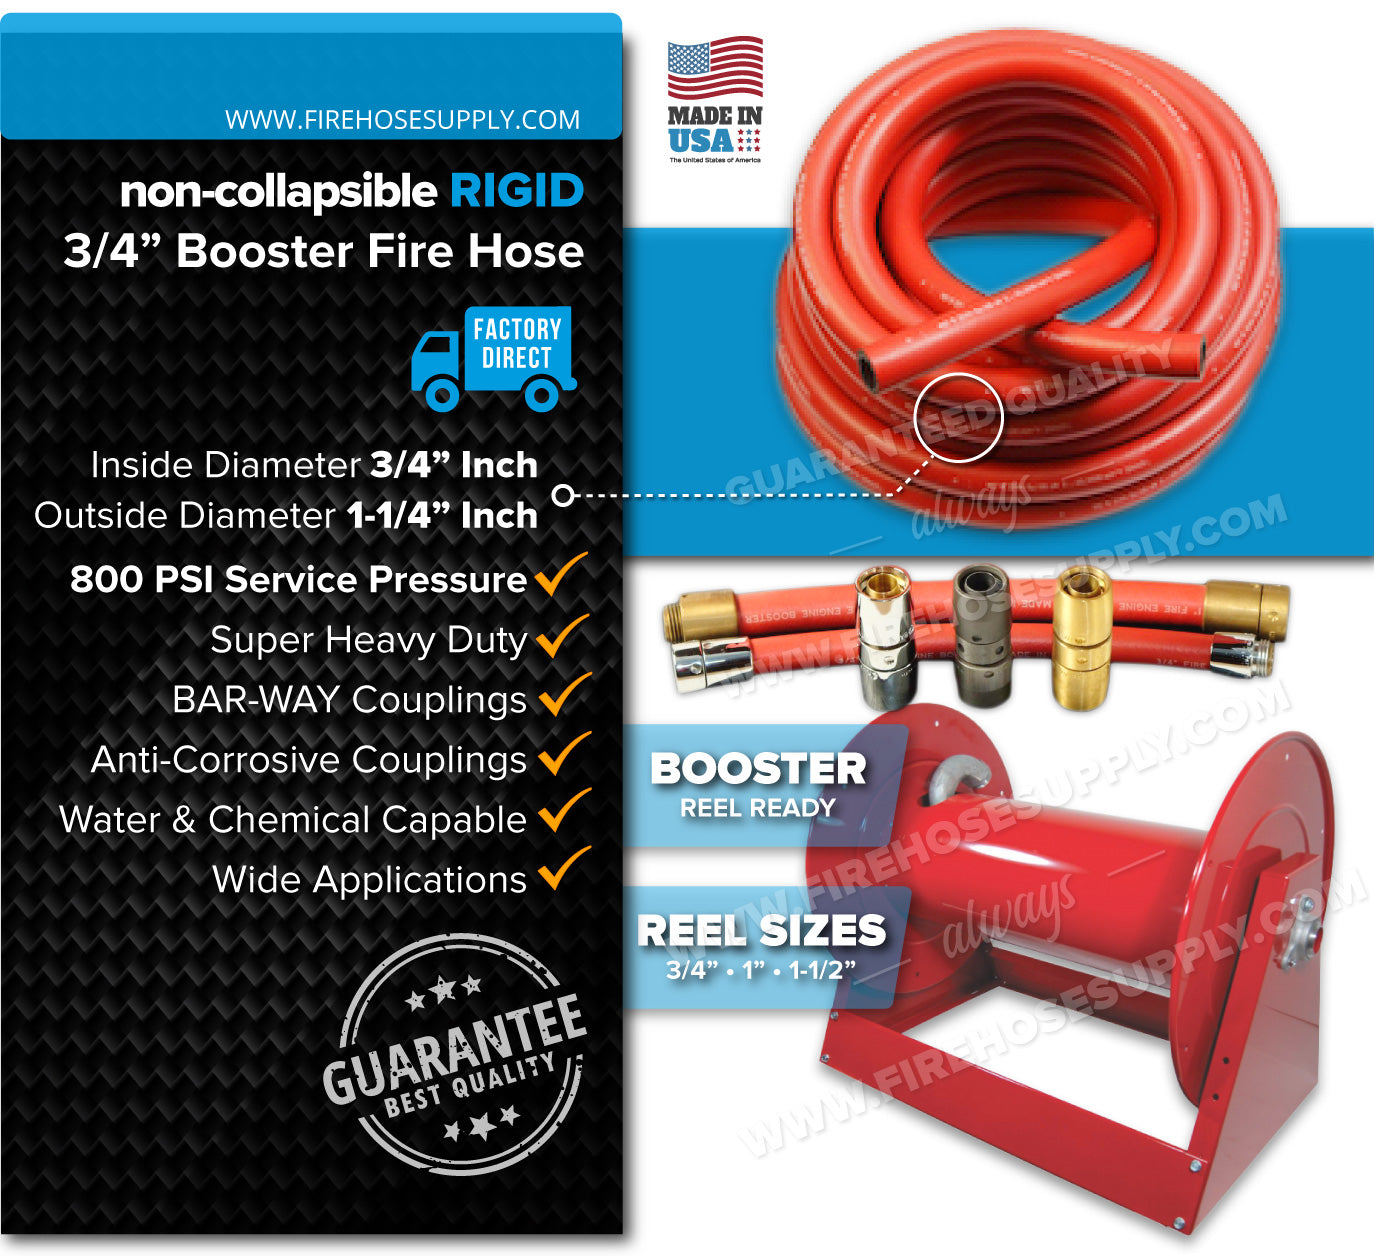 3-4 Inch Booster Fire Hose Uncoupled Hose Only Overview